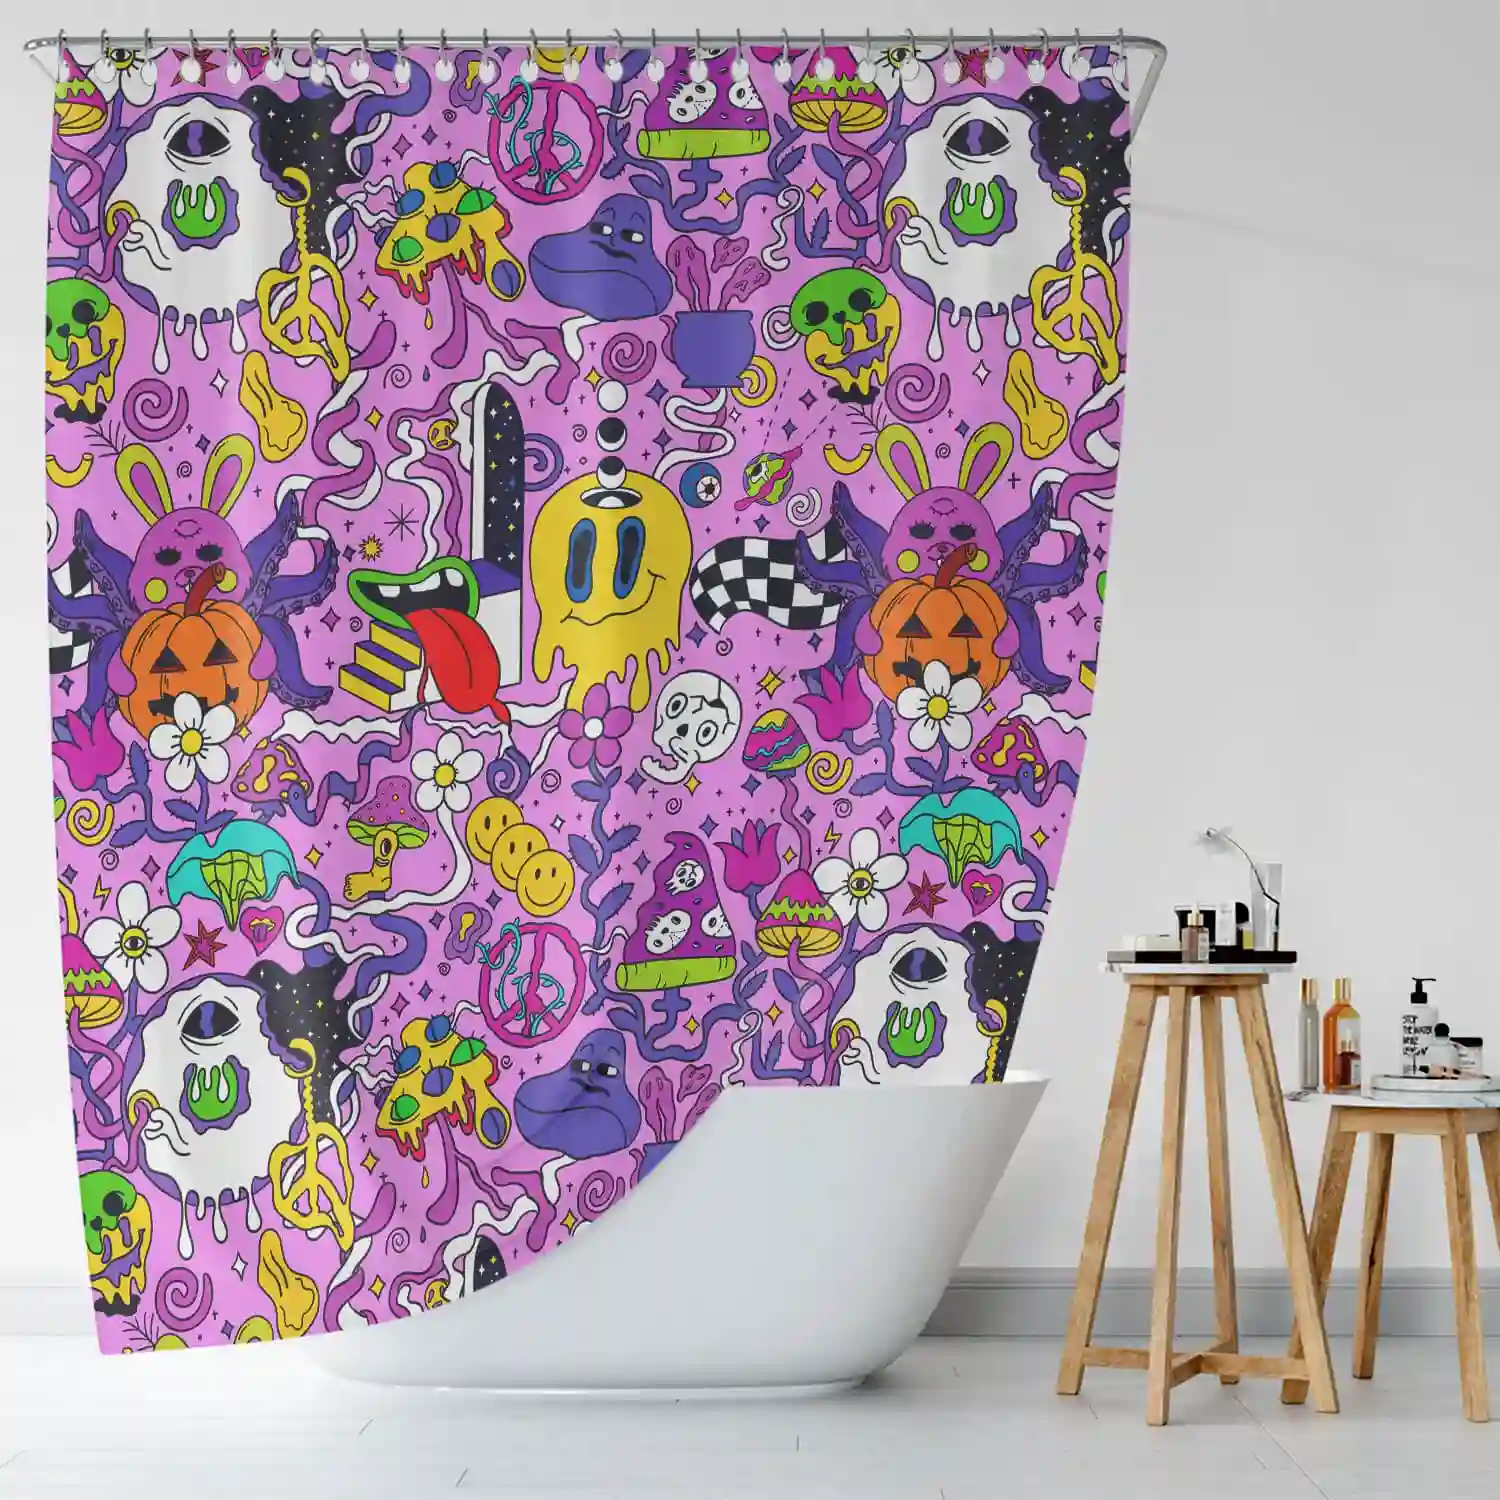 Guest bathroom shower curtain ideas: A purple shower curtain with a variety of cartoon characters on it.